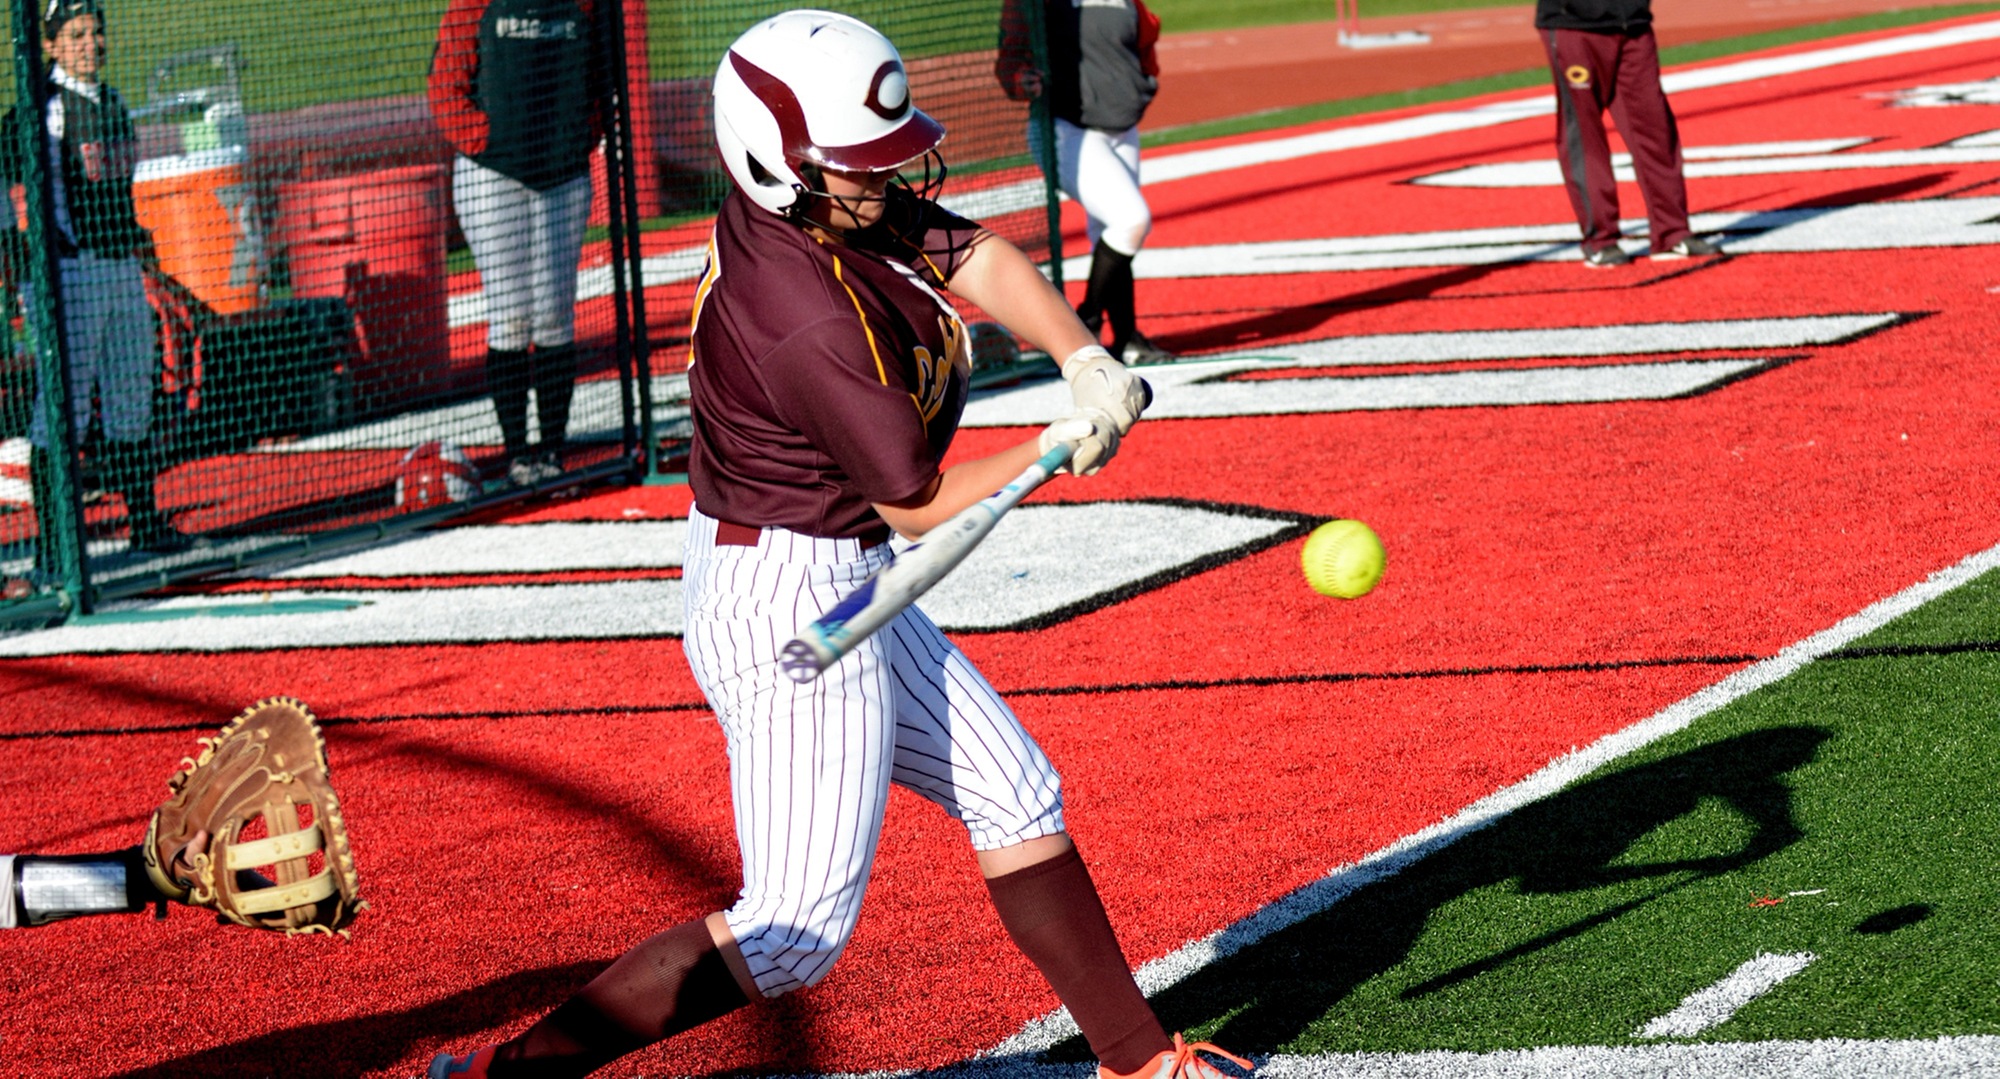 Sophomore Nicole Johannes connects on a pitch in the Cobbers' DH at MSU Moorhead. Johannes had her first home run of the season in the first game.